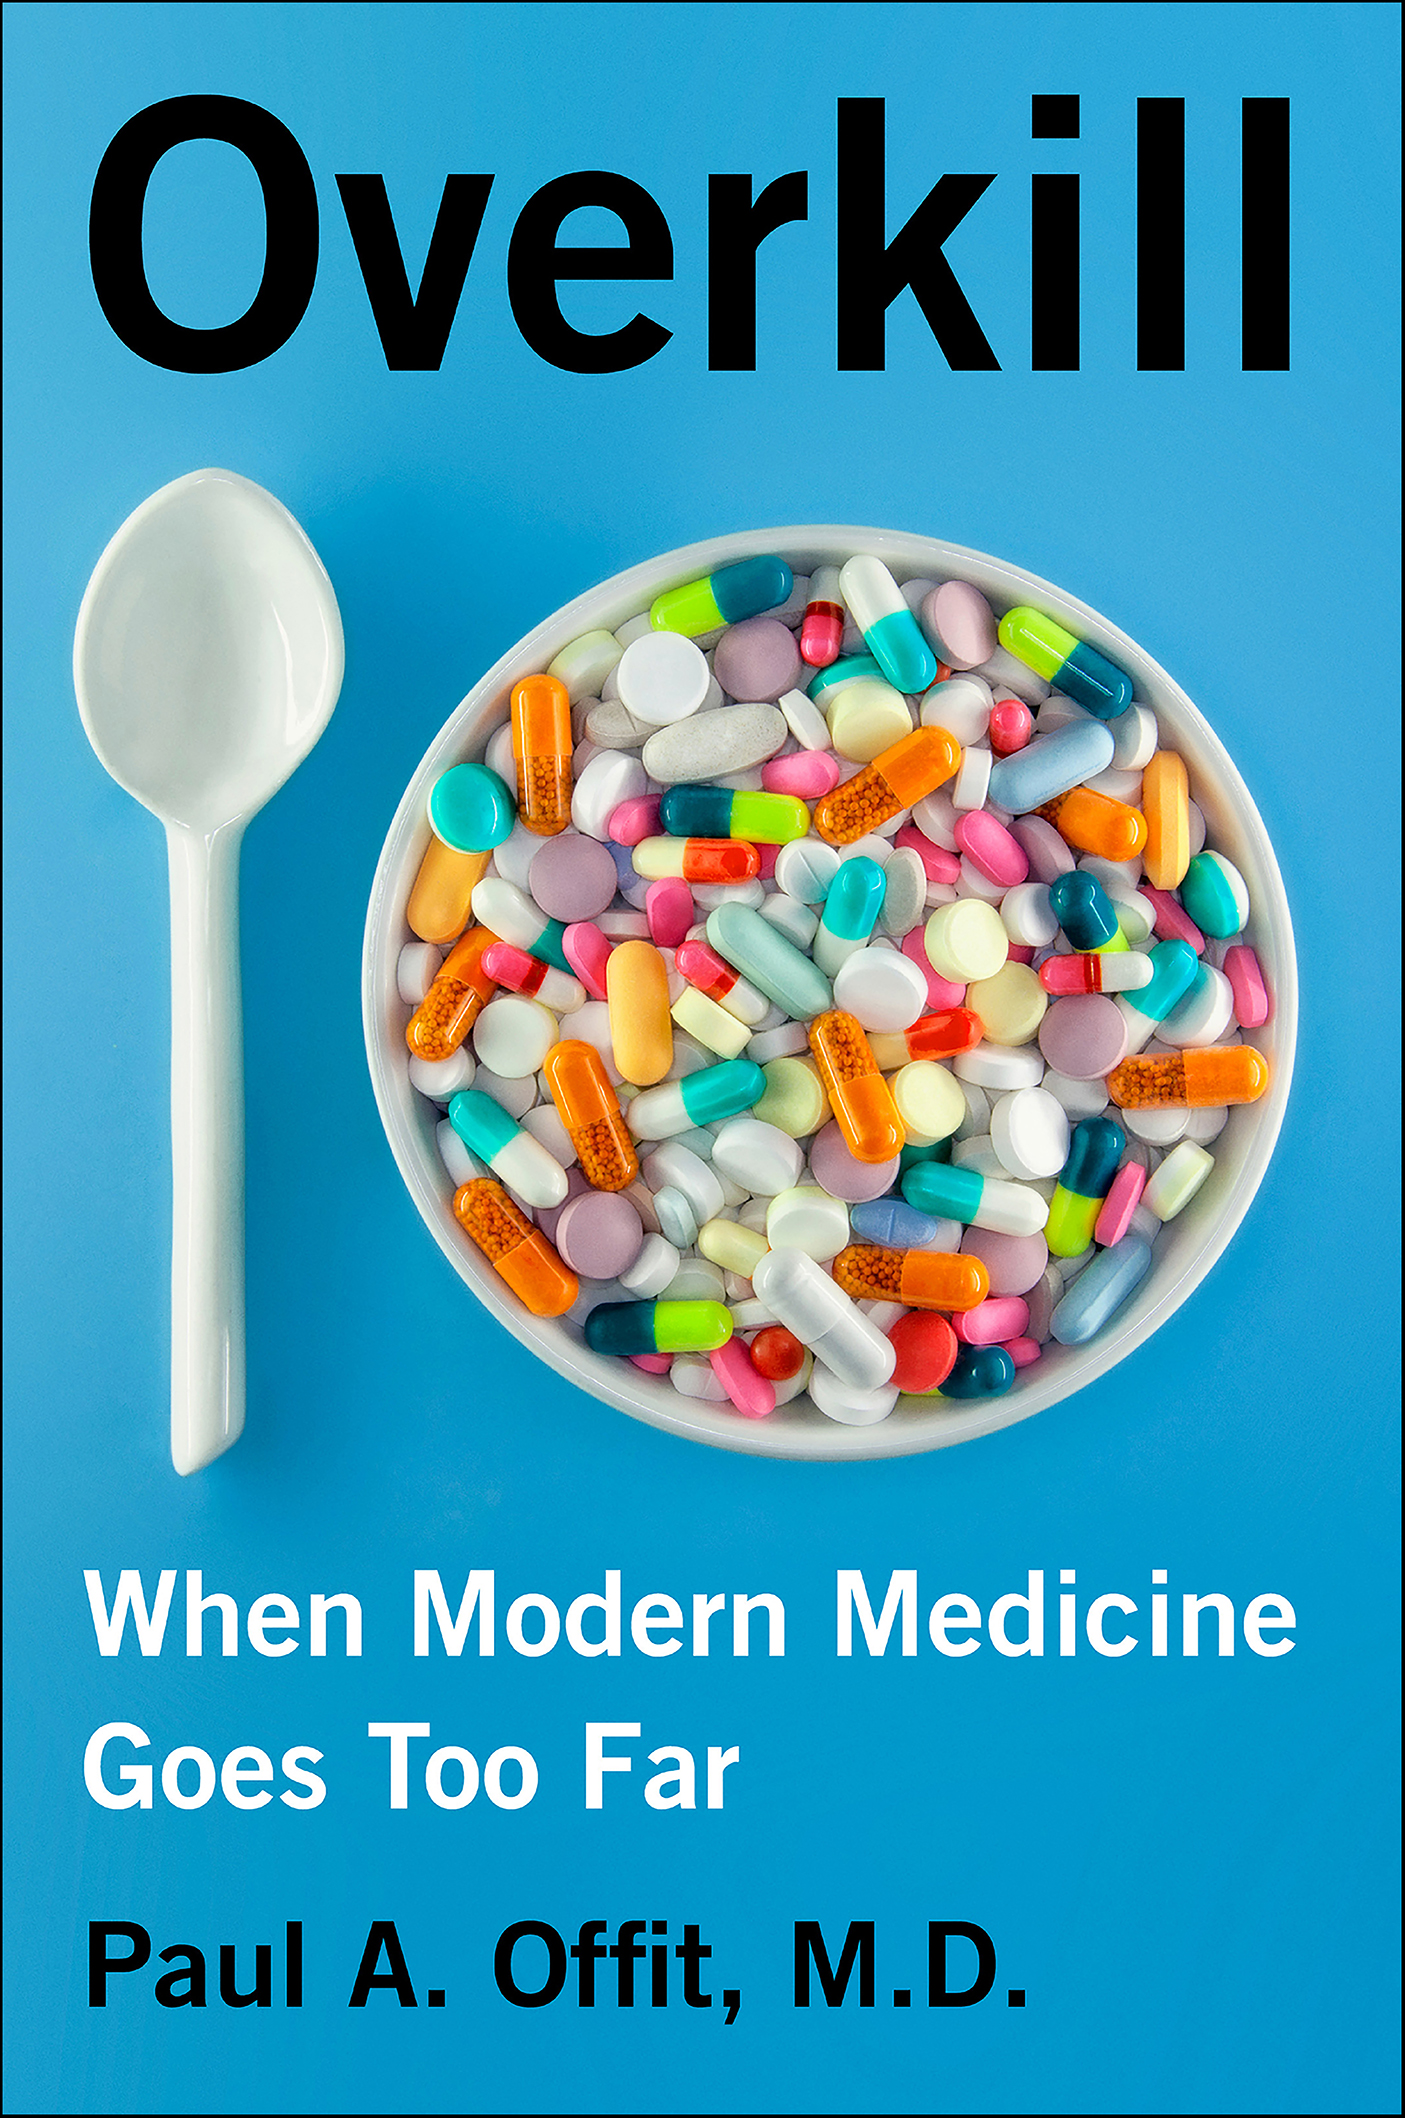 Overkill When Modern Medicine Goes Too Far cover image